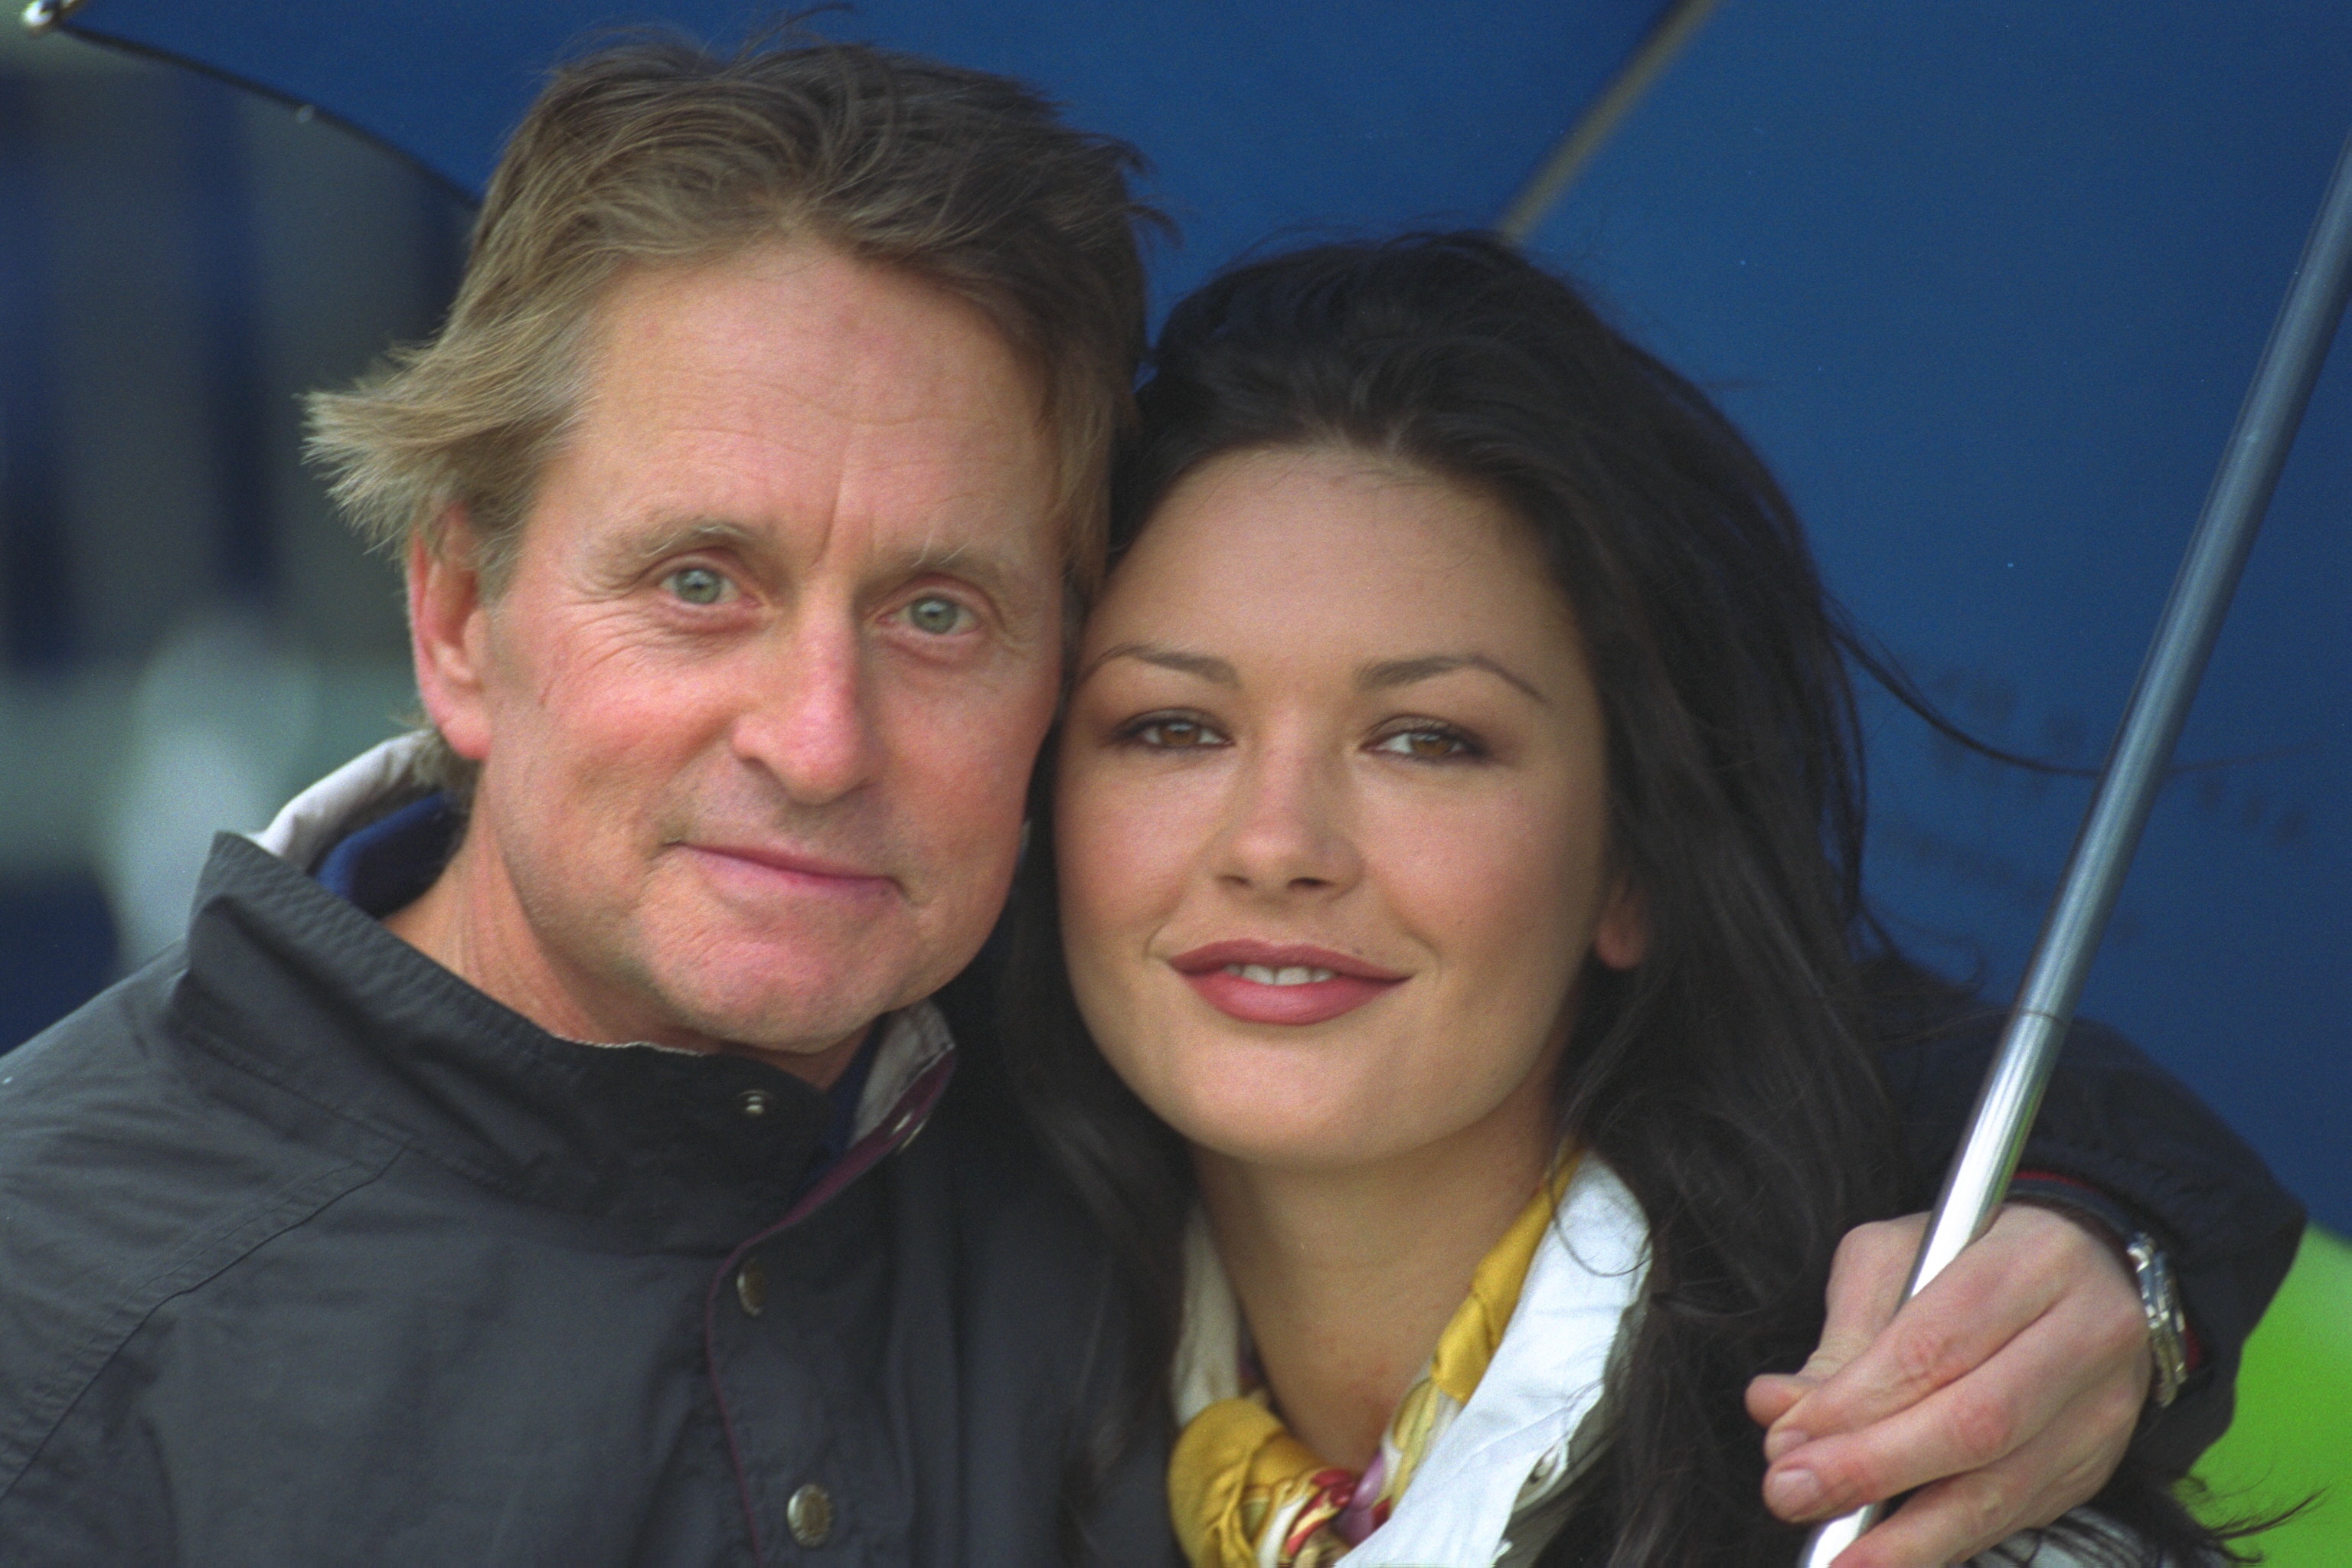 Michael Douglas and Catherine Zeta-Jones shelter from the drizzle while playing golf at St. Andrews. | Source: Getty Images